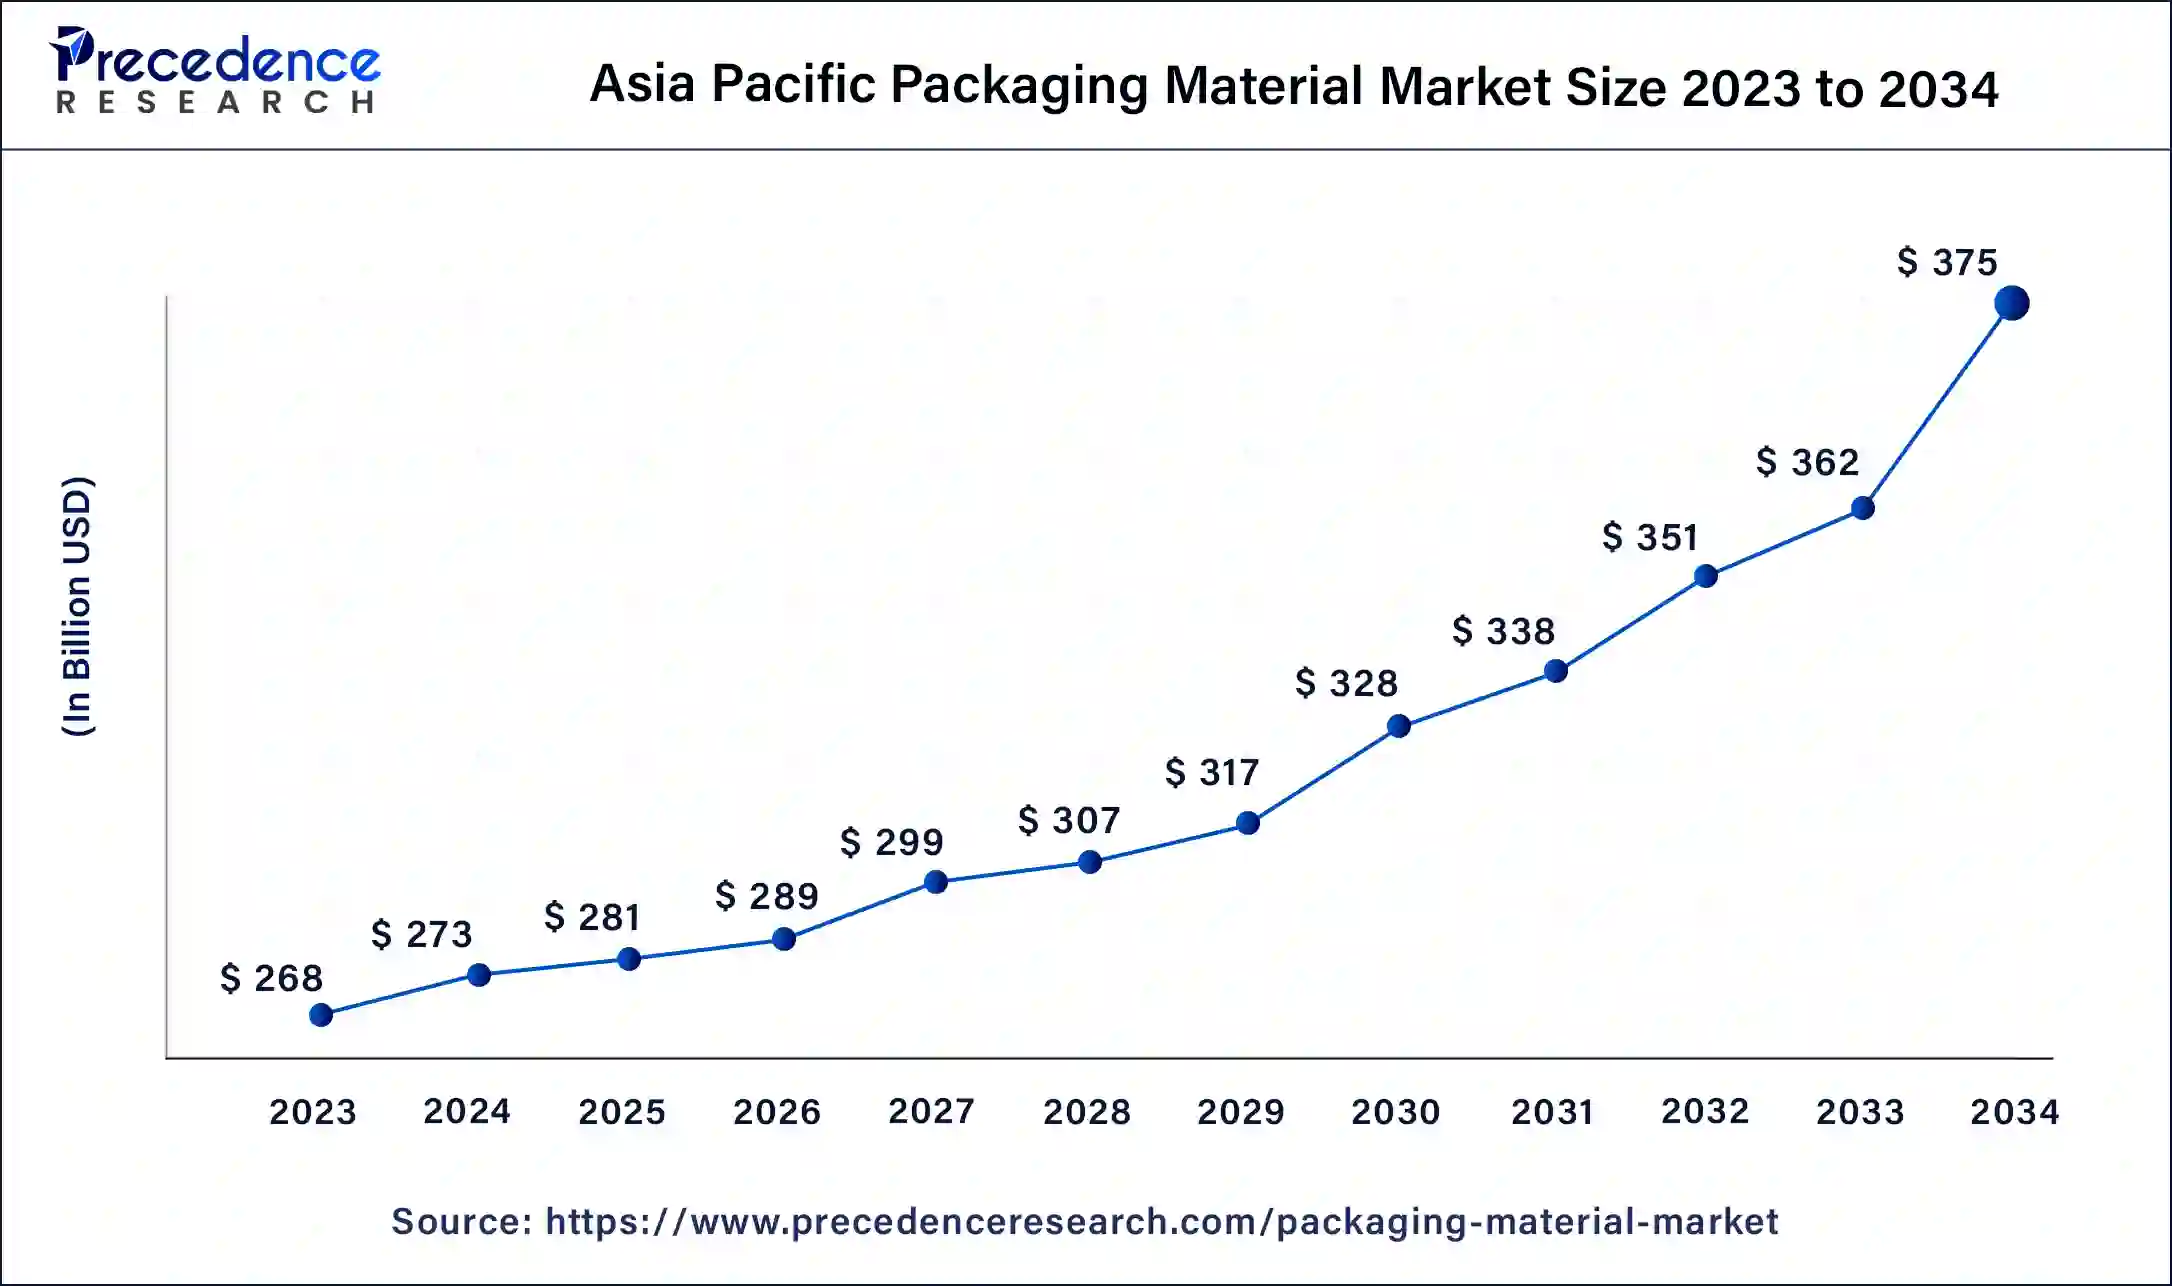 Asia Pacific Packaging Material Market Size 2024 to 2034